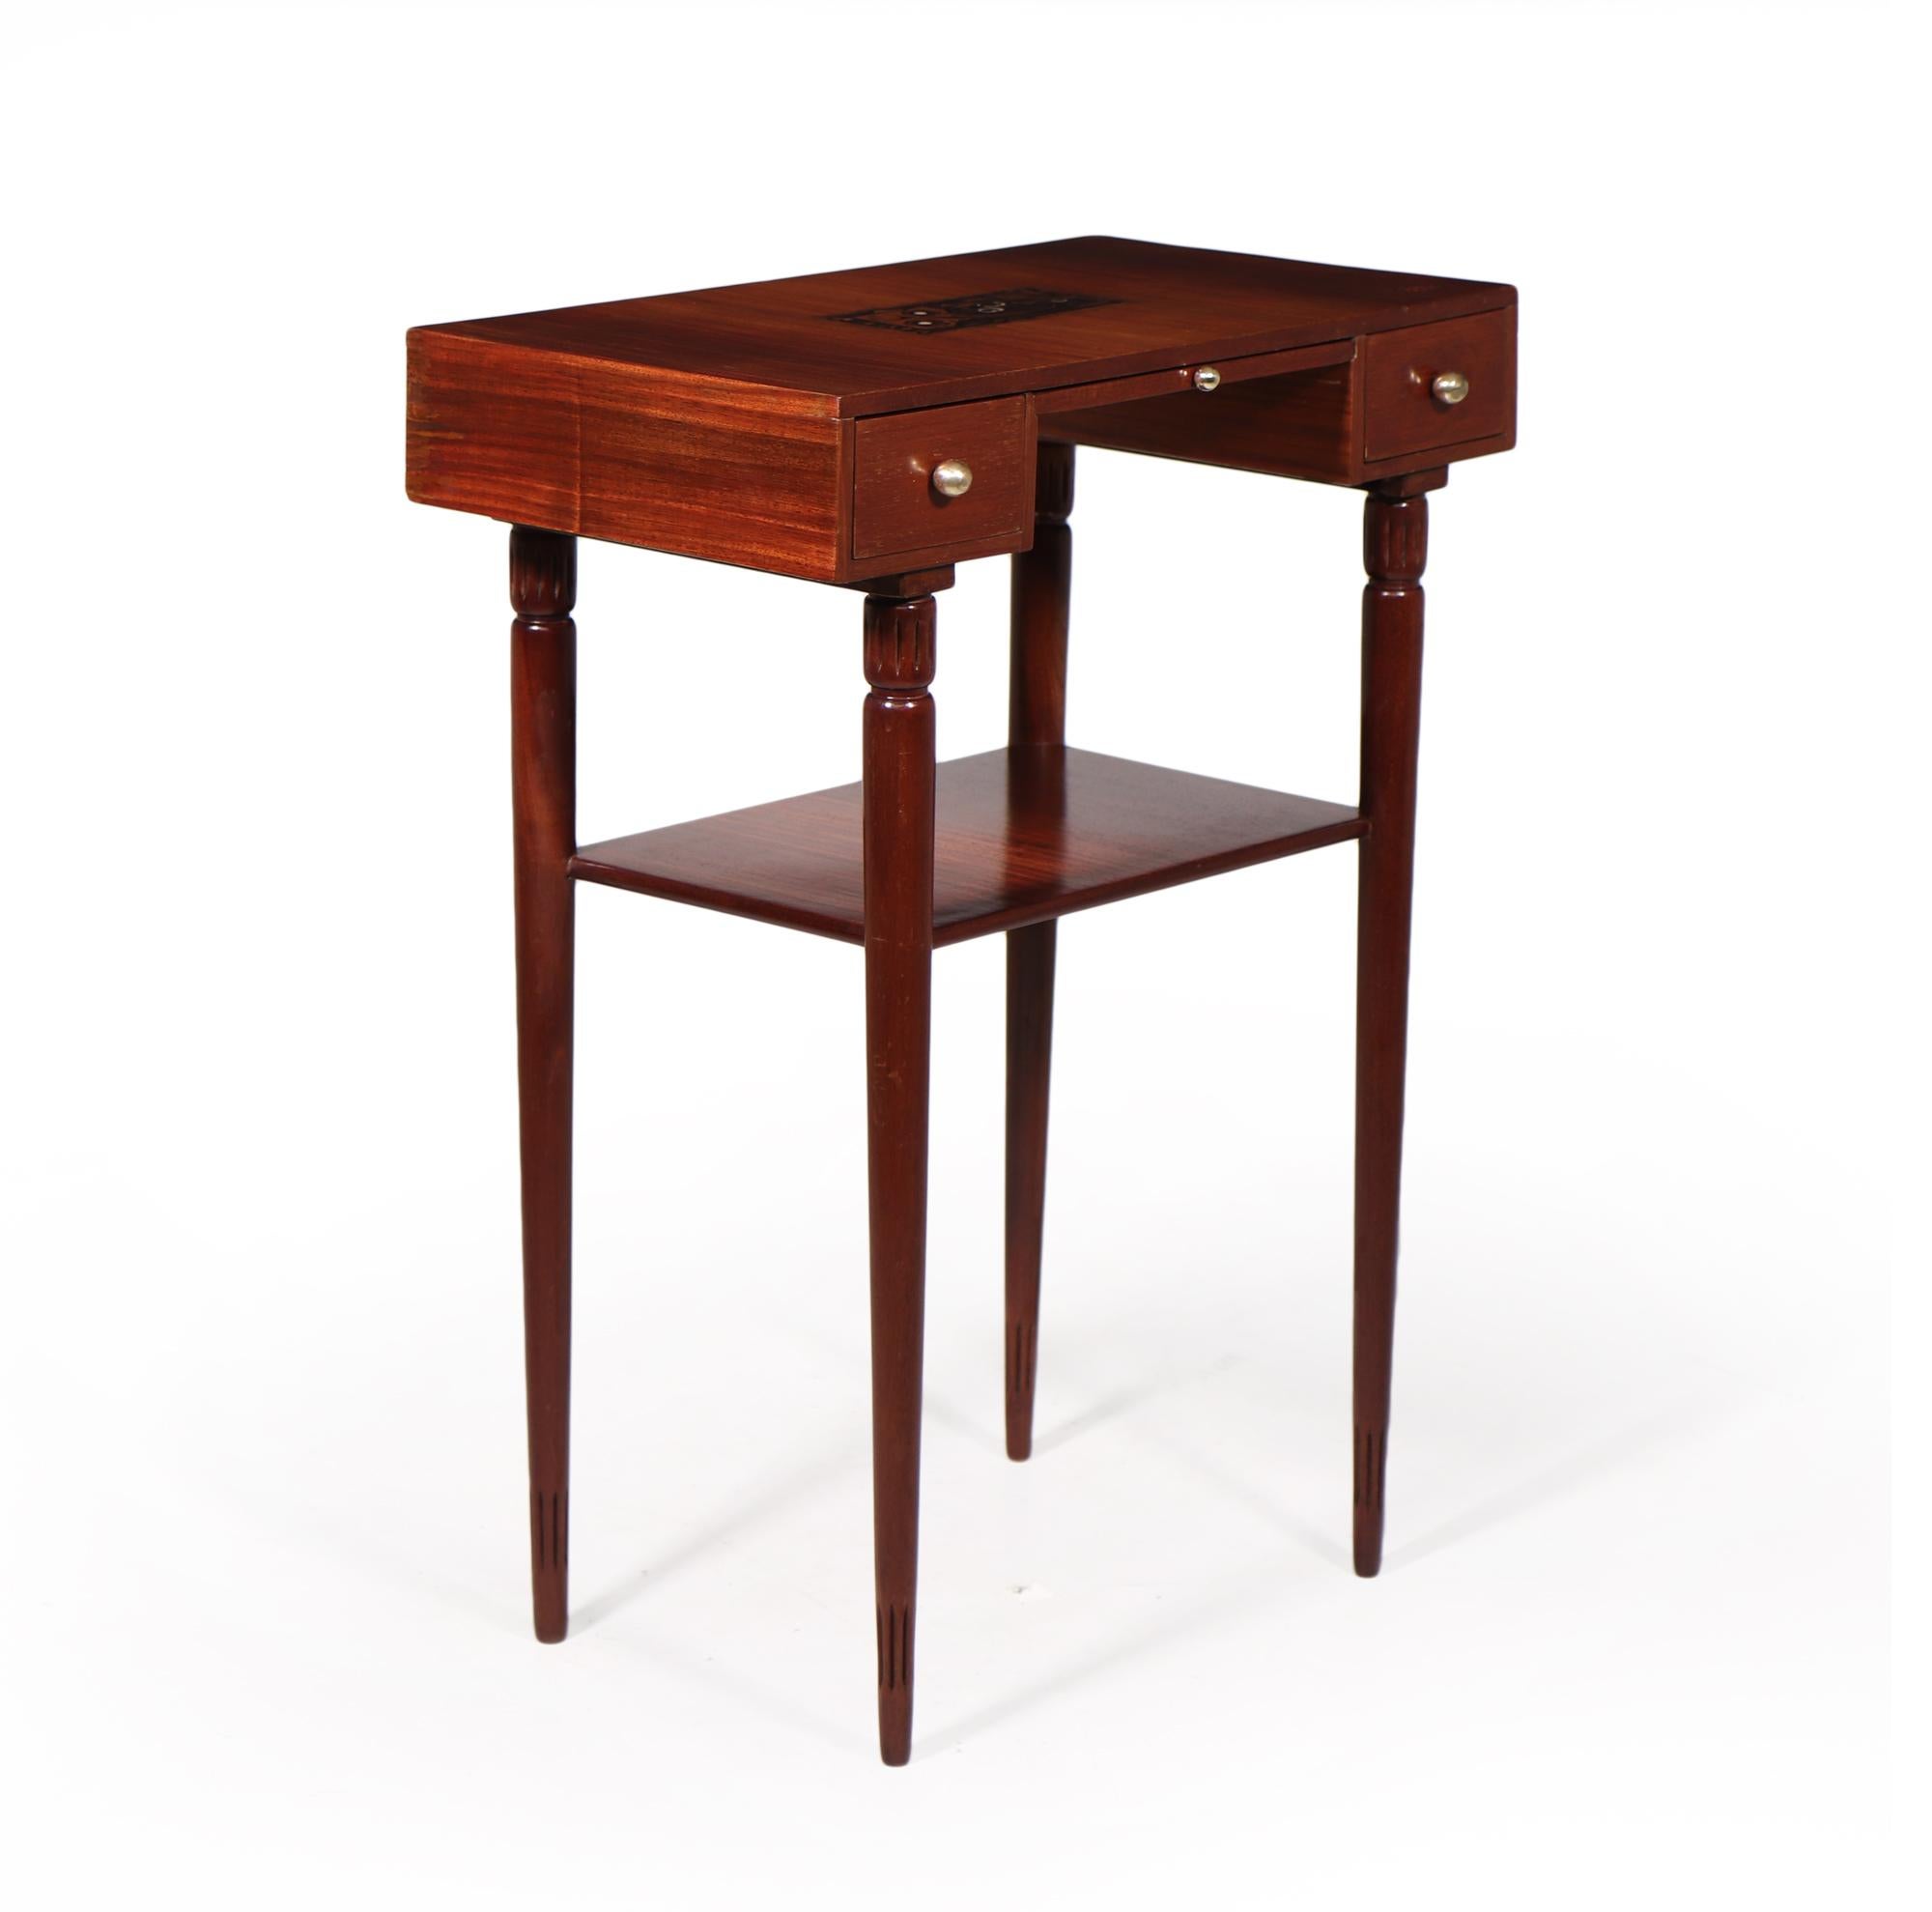 A rare early French art deco side table with two drawers and a center slide, macassar ebony inlaid stingray to the top with the Marjorelle signature to the top also, The table has been restored where necessary and fully polished by hand and in